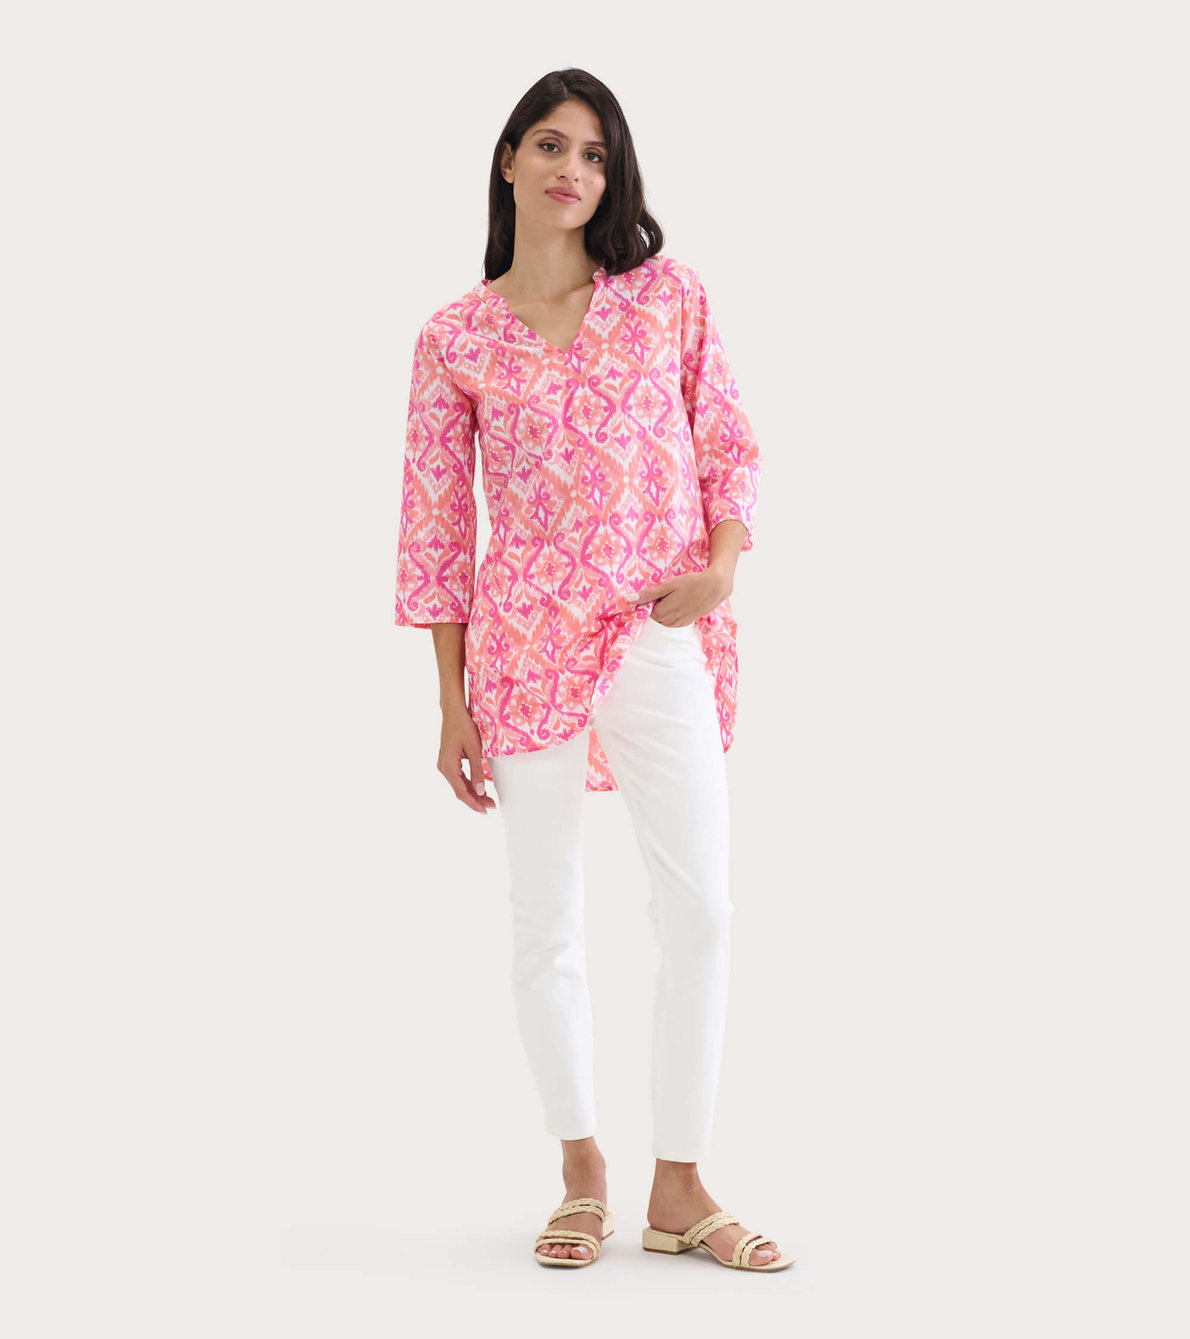 View larger image of Women's Sunset Ikat Delray Beach Tunic